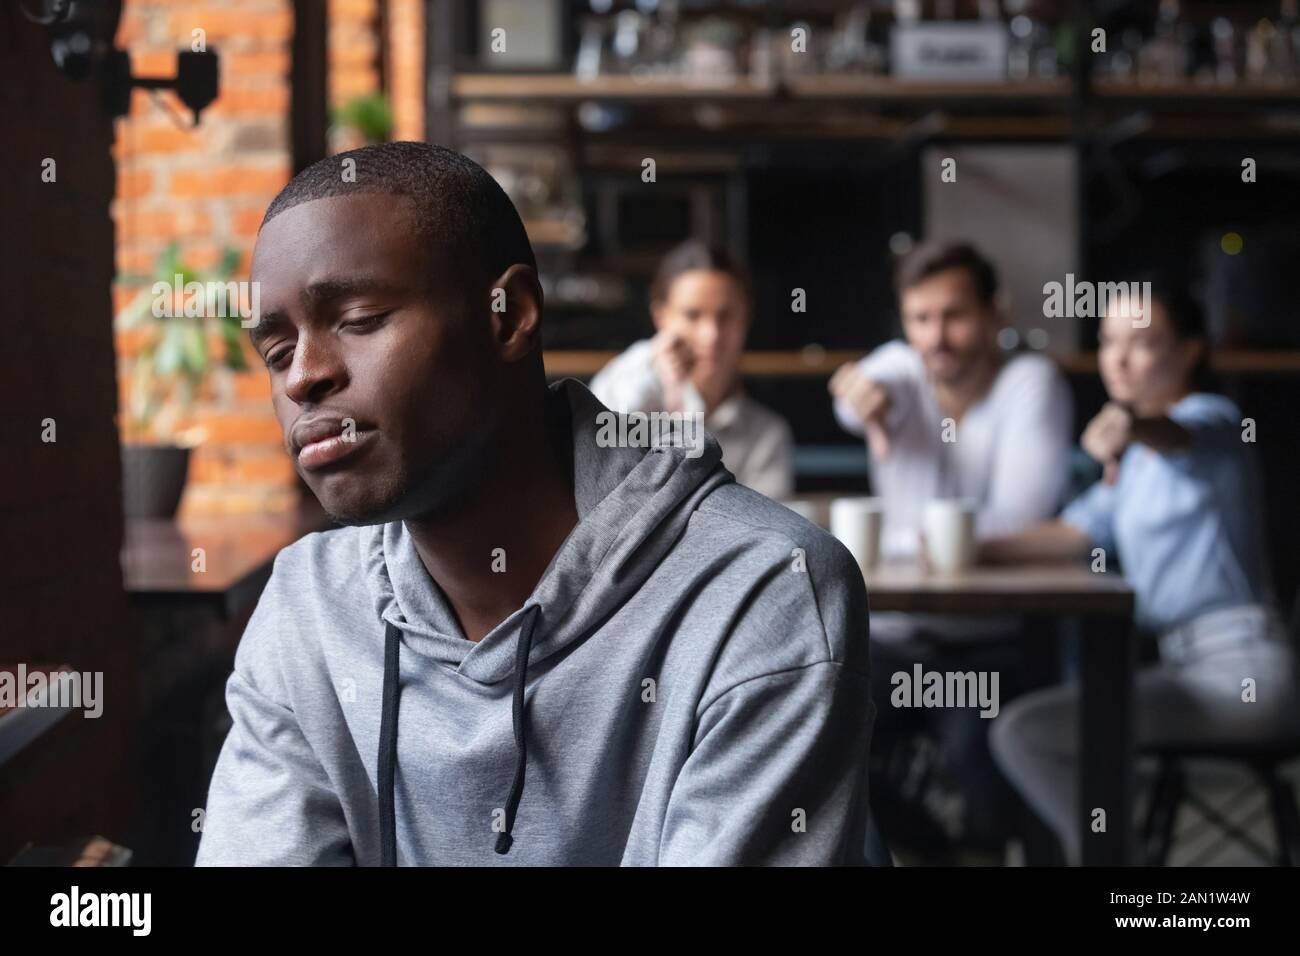 Depressed male guy suffer from bullying feel discriminated Stock Photo